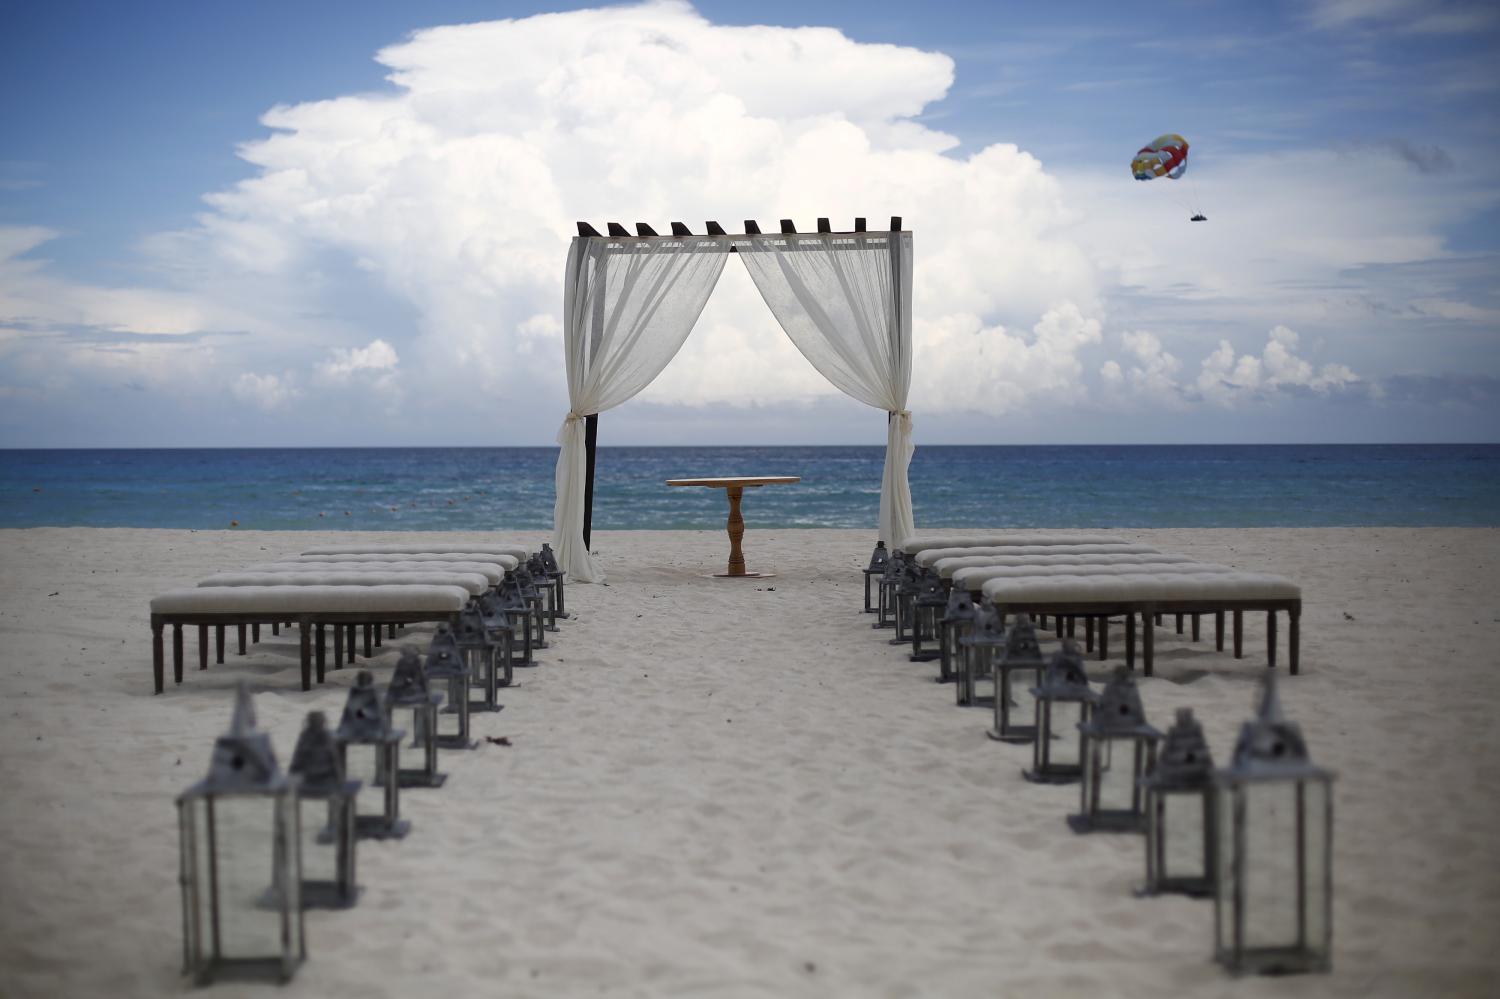 Preparations are made for a wedding on a beach in Cancun, August 15, 2015.